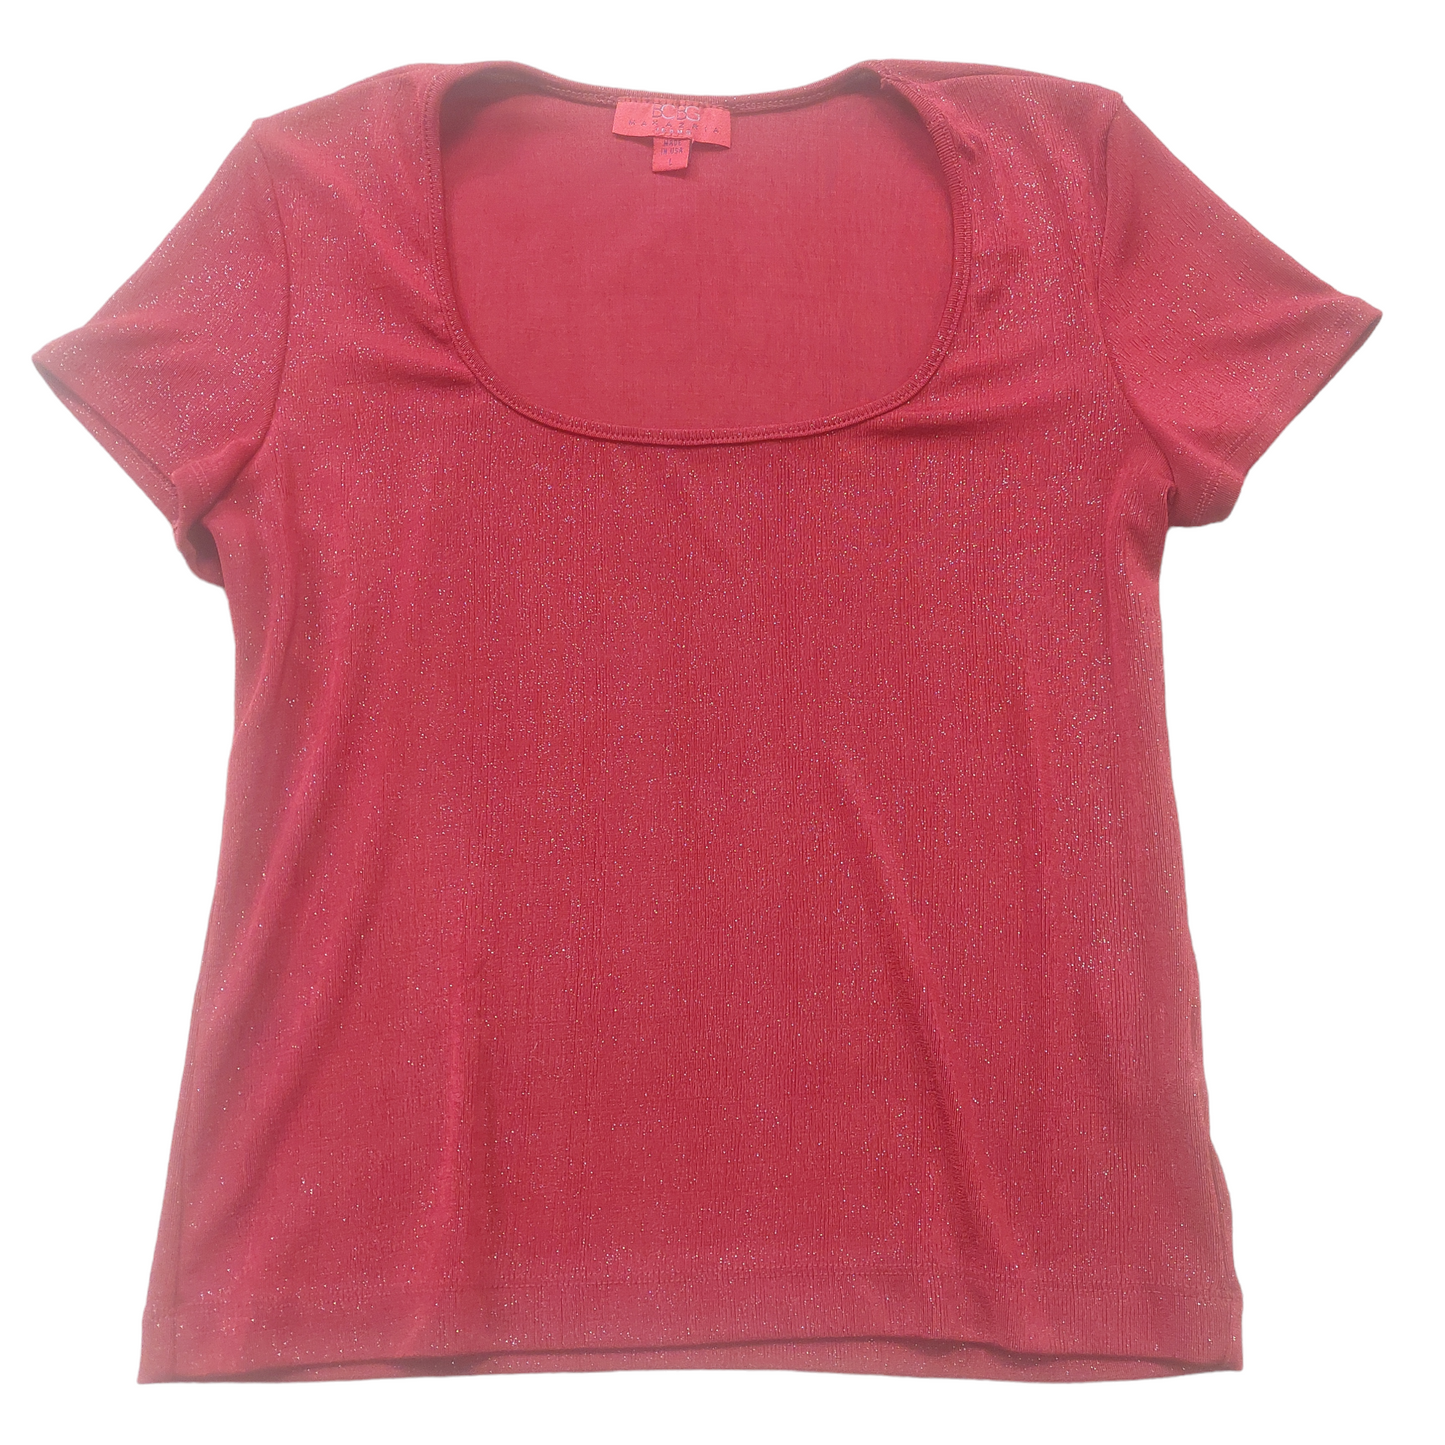 Red Top Short Sleeve Bcbg, Size L